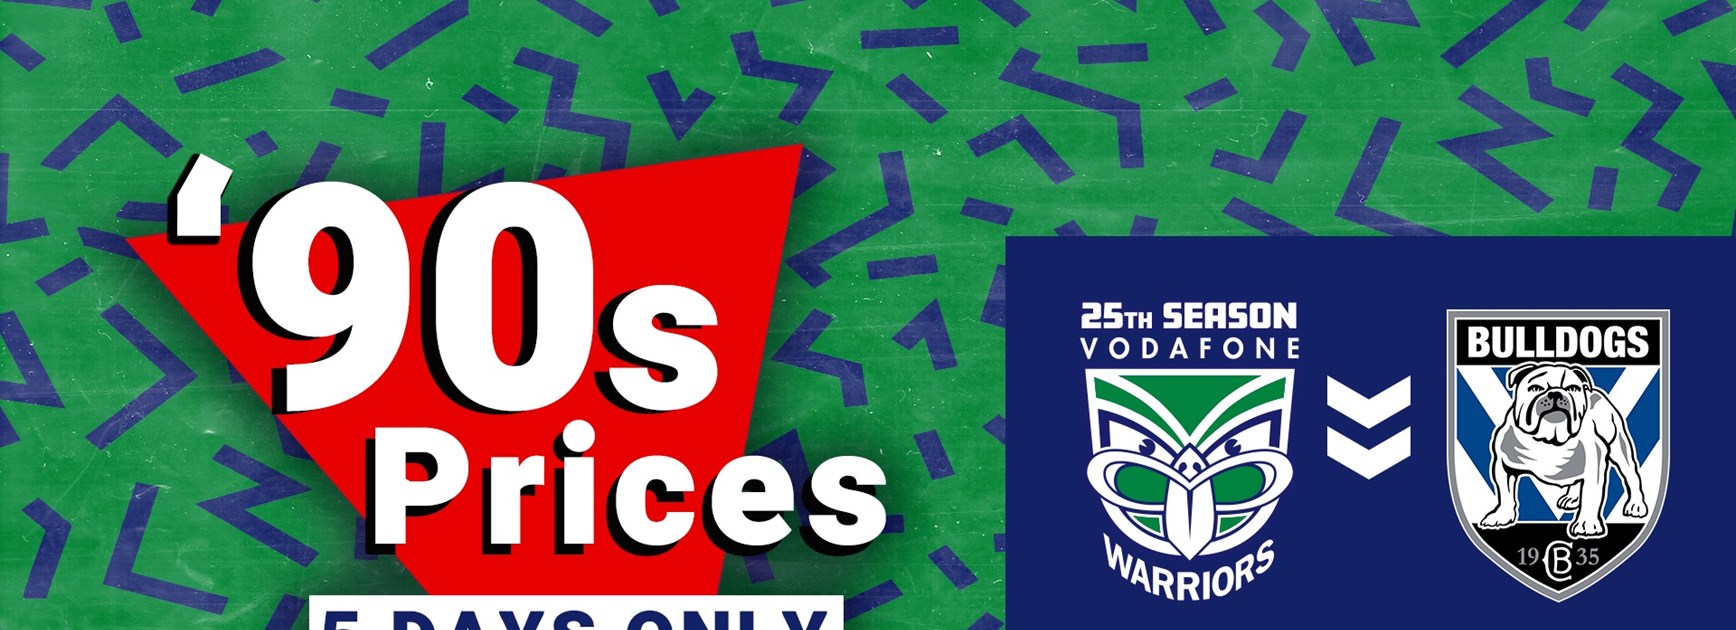 First-round tickets on sale at '90s prices